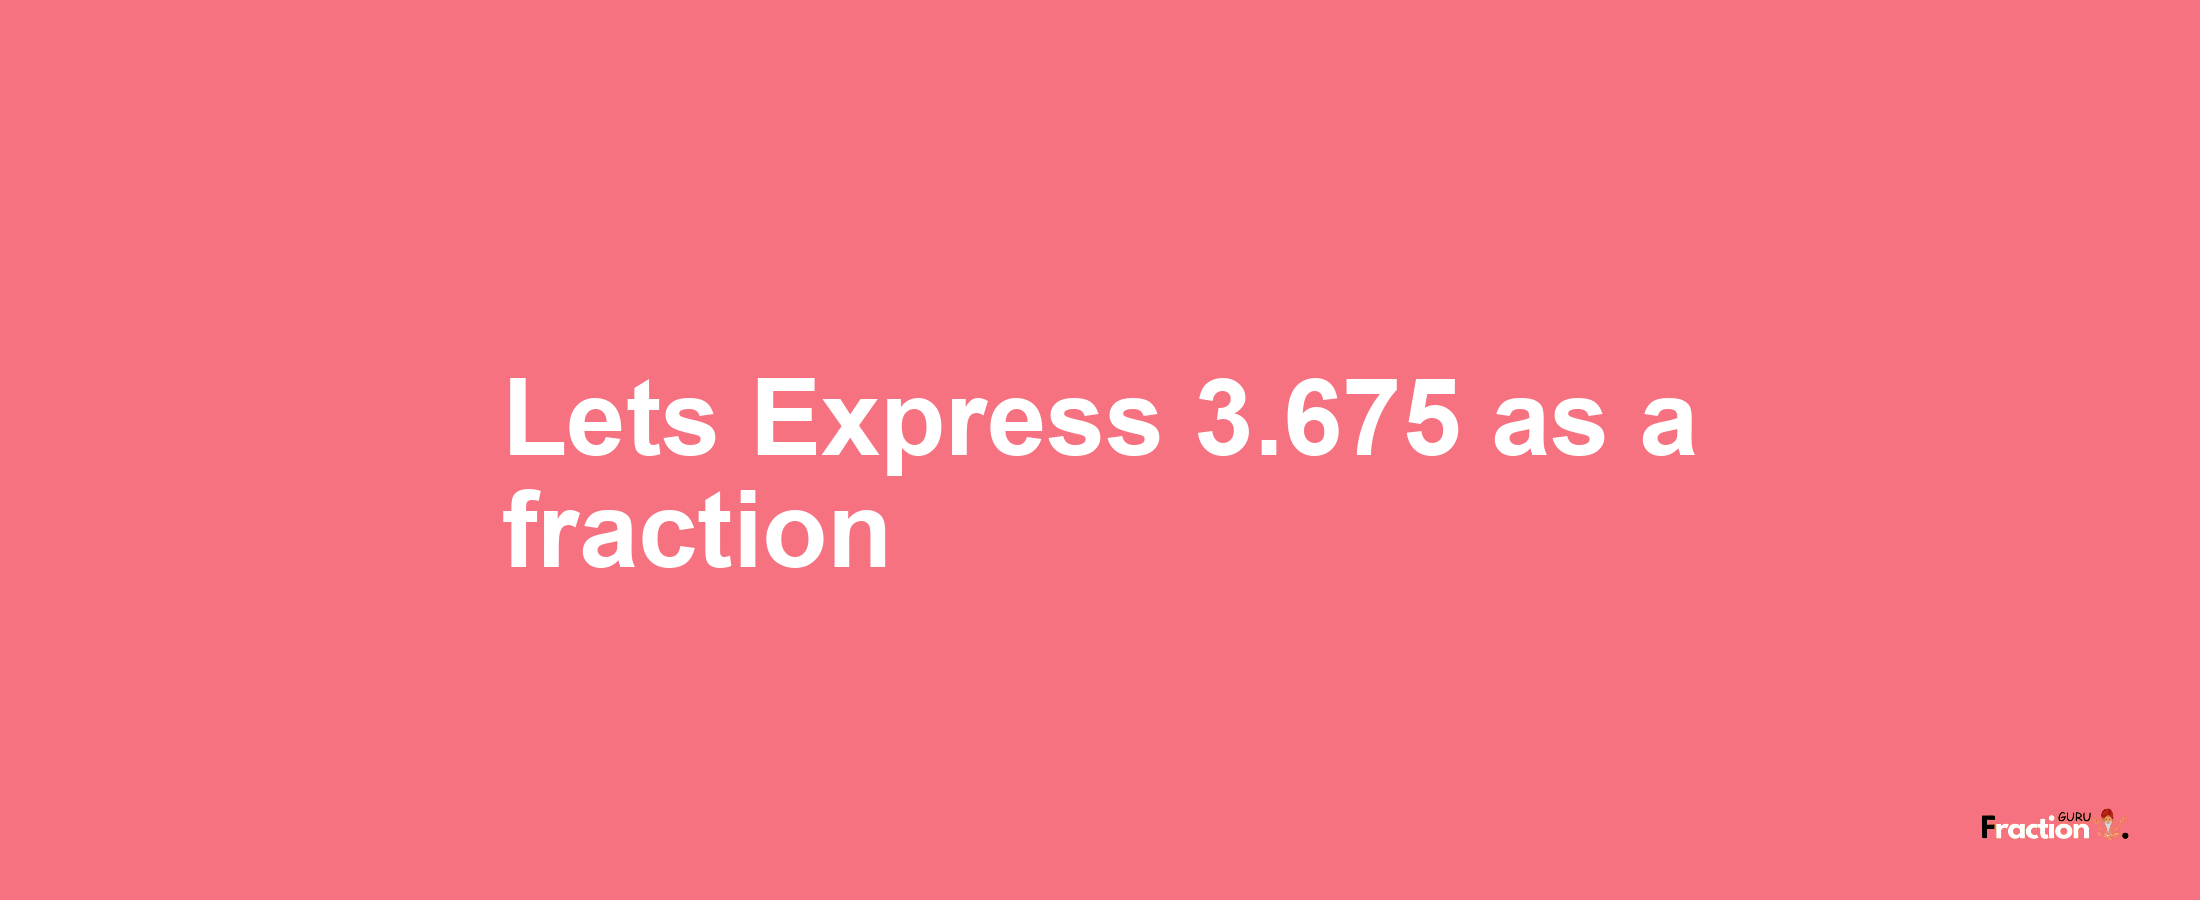 Lets Express 3.675 as afraction